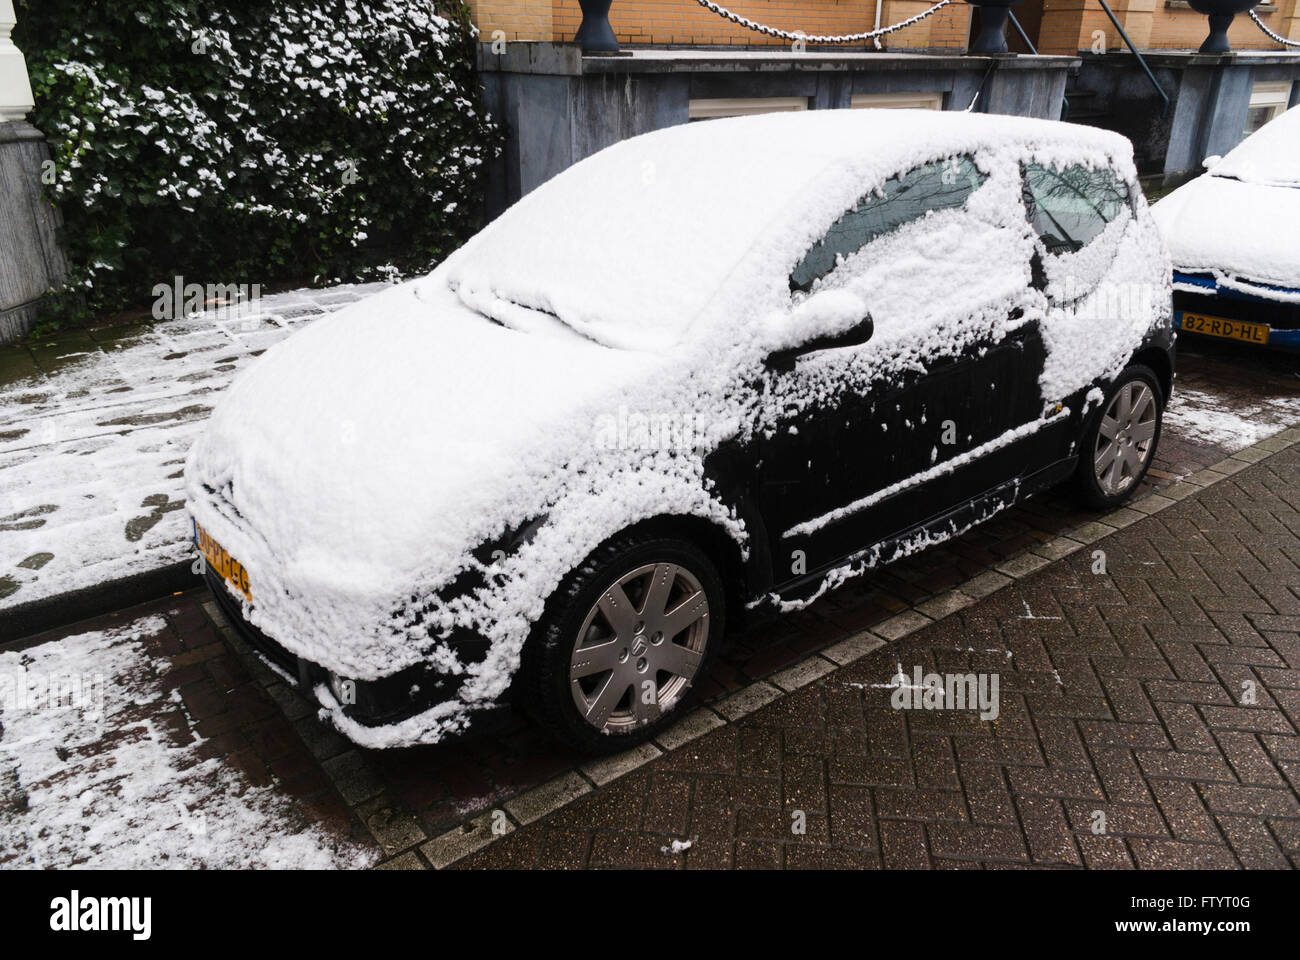 Citroën C2 small car covered in snow. Stock Photo